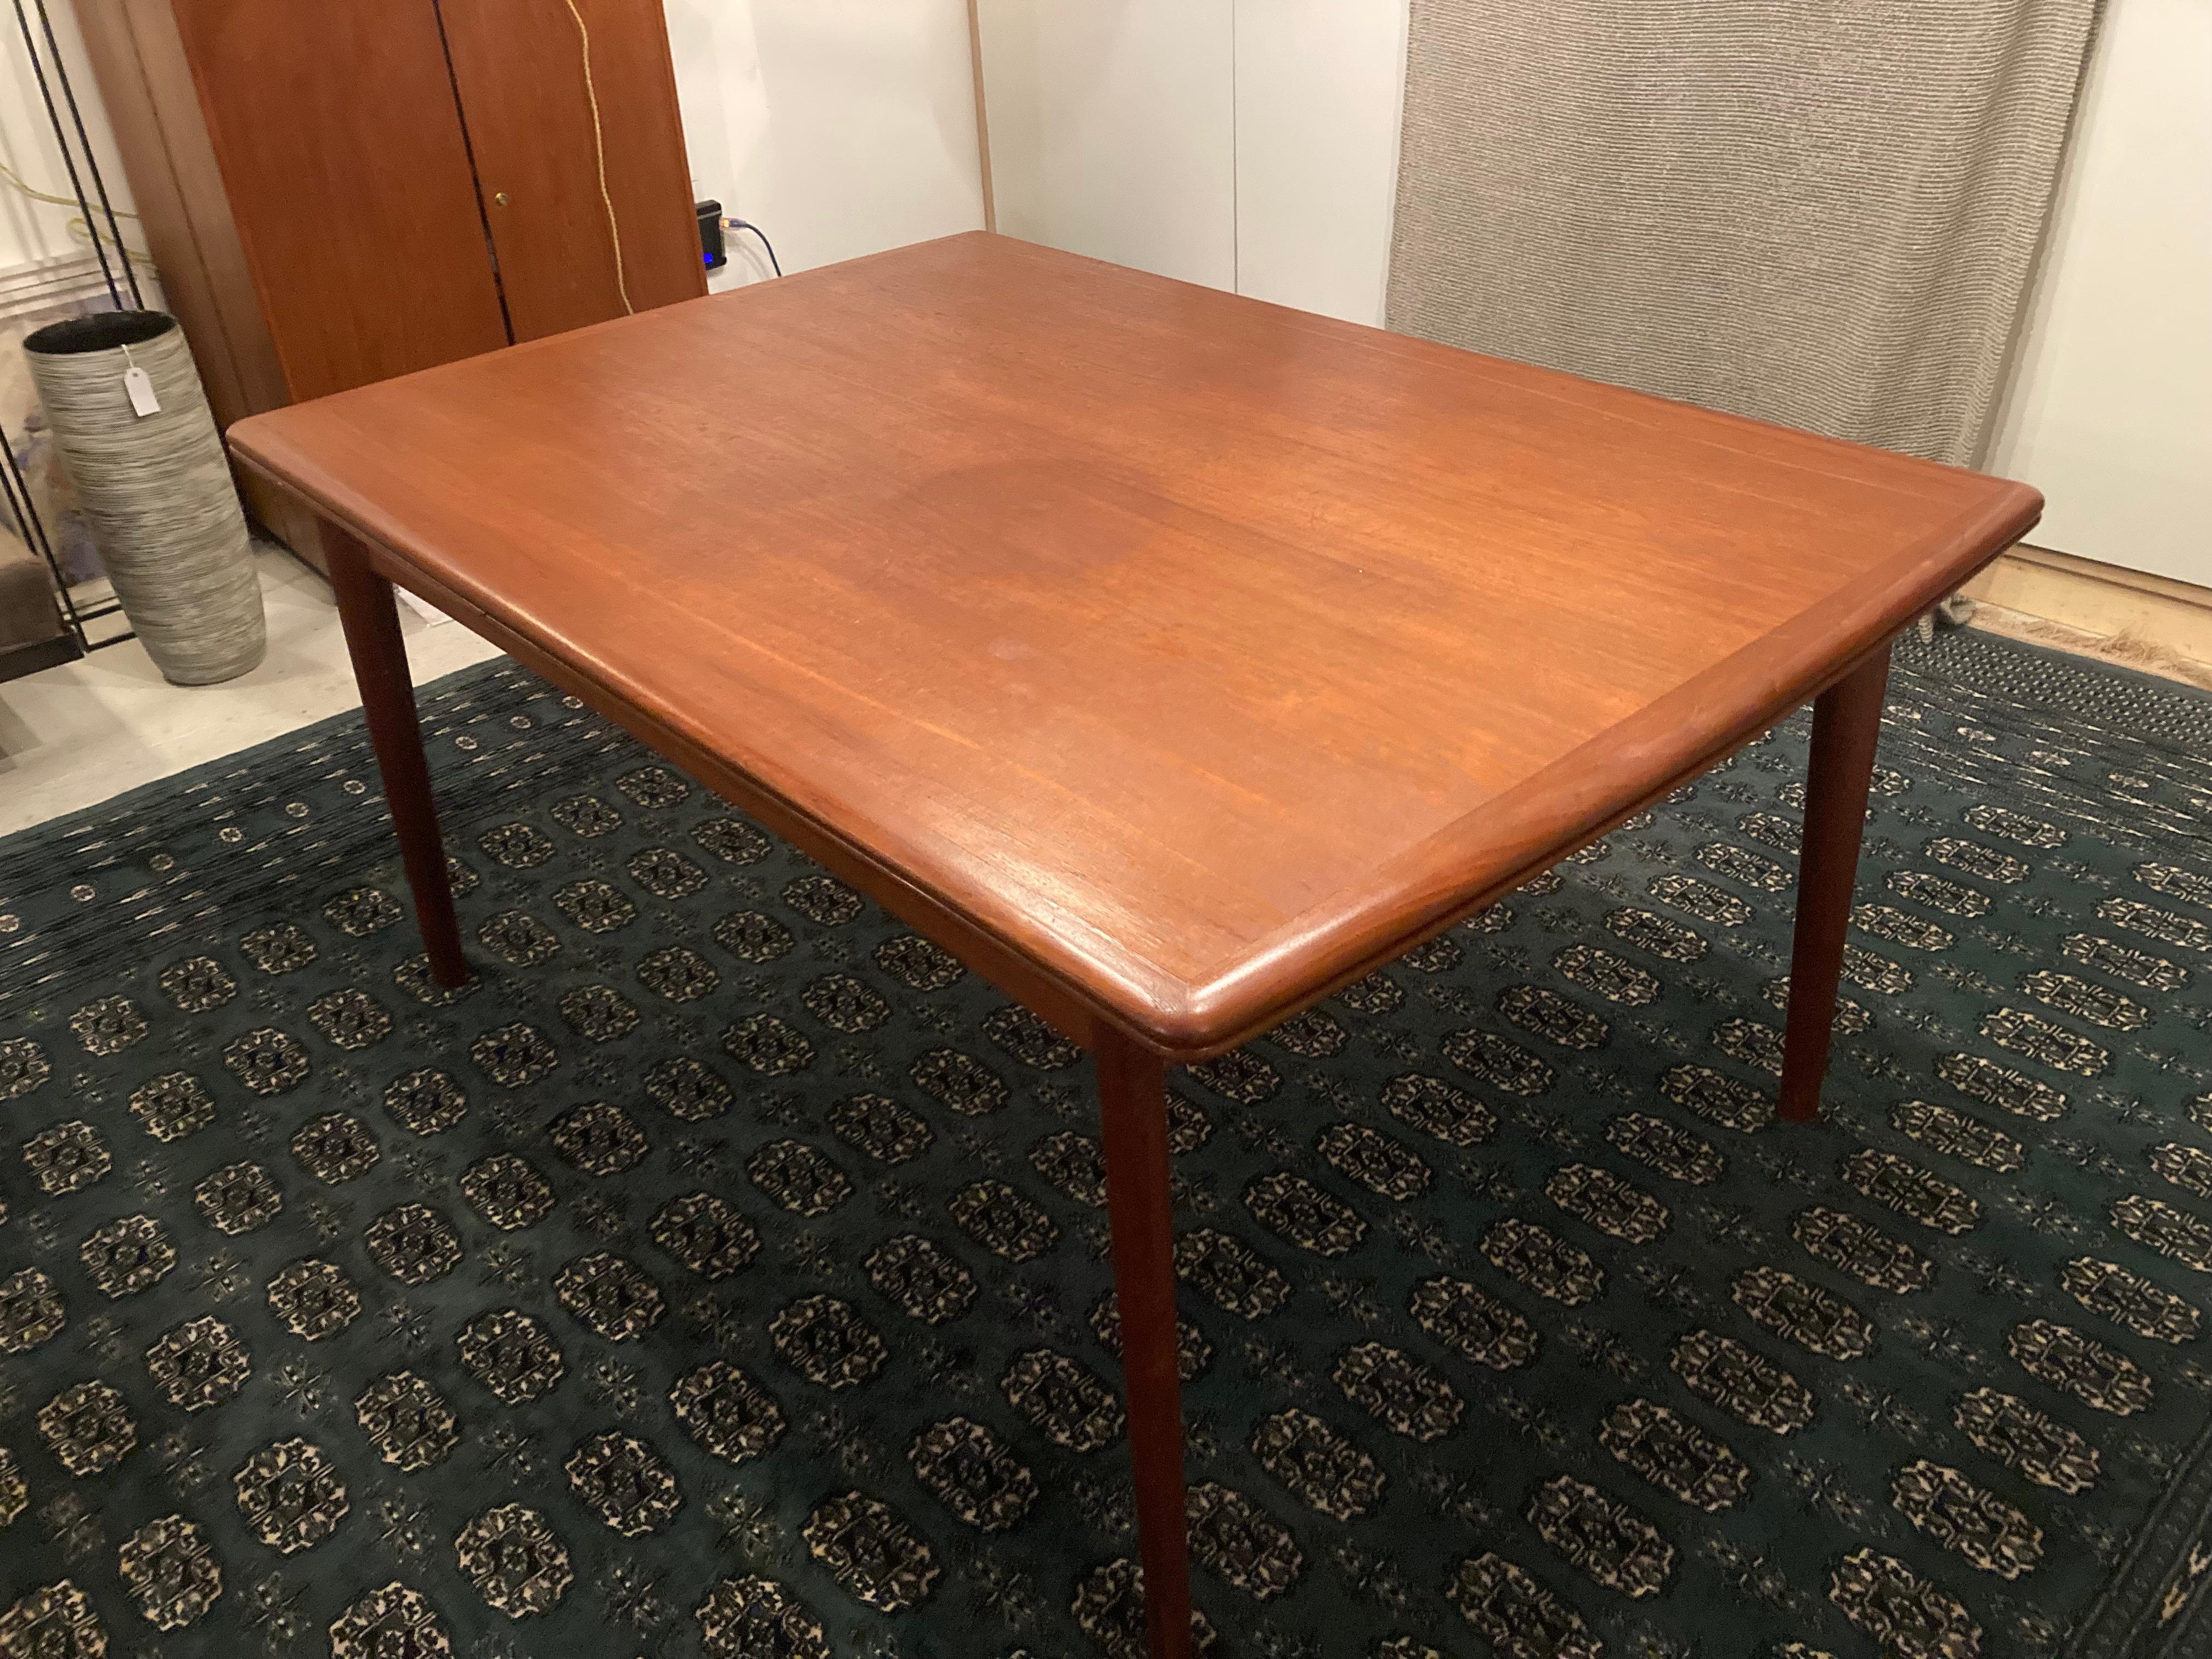 Beautiful long expandable Danish Midcentury rich teak dining table.  

Made in Denmark (?)

Condition : Minor surface wear, scratches and scuffs consistent with age and use.

Dimensions: 28.75